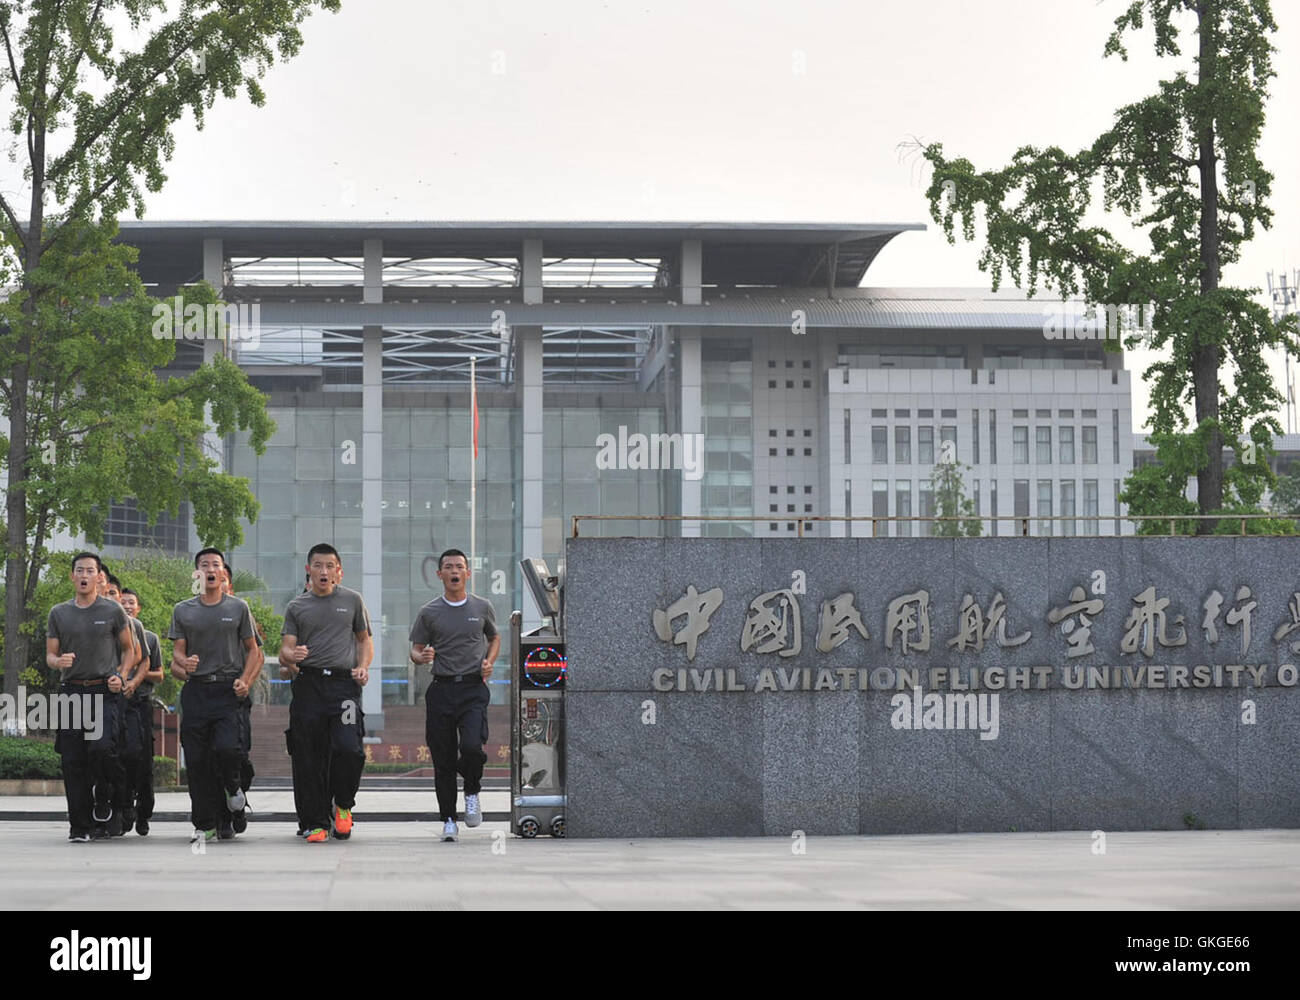 (160821) -- DEYANG, Aug. 21, 2016 (Xinhua) -- Trainees practise at the Guanghan Campus of China Aviation Flight University of China in Deyang, southwest China's Sichuan Province, Aug. 18, 2016. Aviation security officer, also known as flight security officer, is responsible for guarding safety of persons on board and plane on a civil aircraft. To become an aviation security officer is not an easy thing. After a preliminary training for two months and a half, applicants must have at least 100-hour training on real planes. Despite of rigid test, many Chinese young people choose this job as their Stock Photo